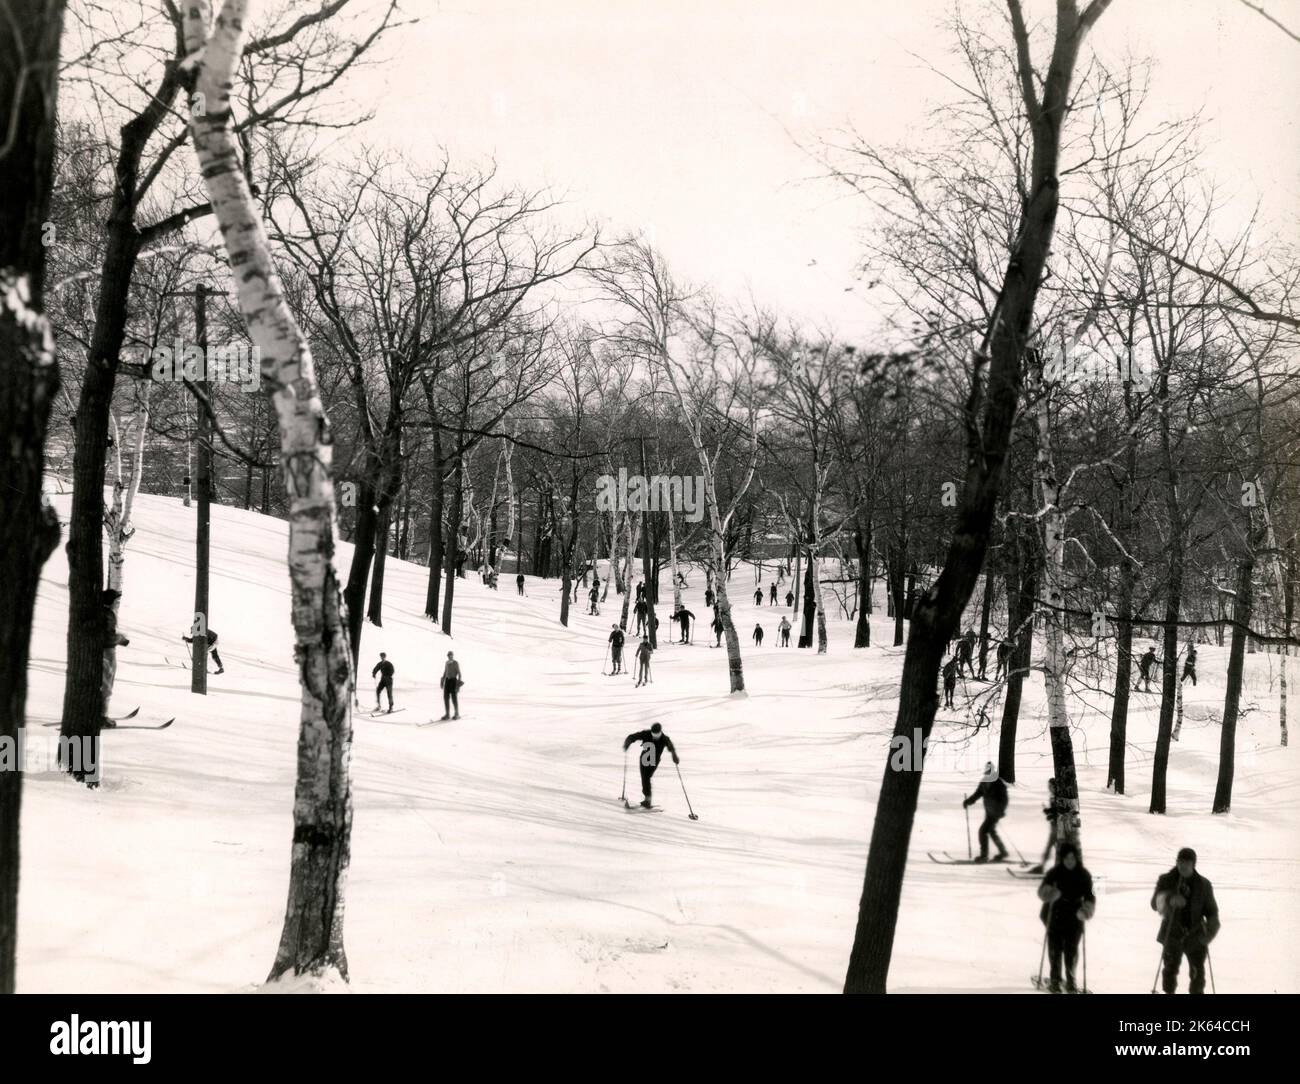 Early 20th century vintage press photograph - skiers skiing among trees, Mont-Royal, Montreal, Canada Stock Photo